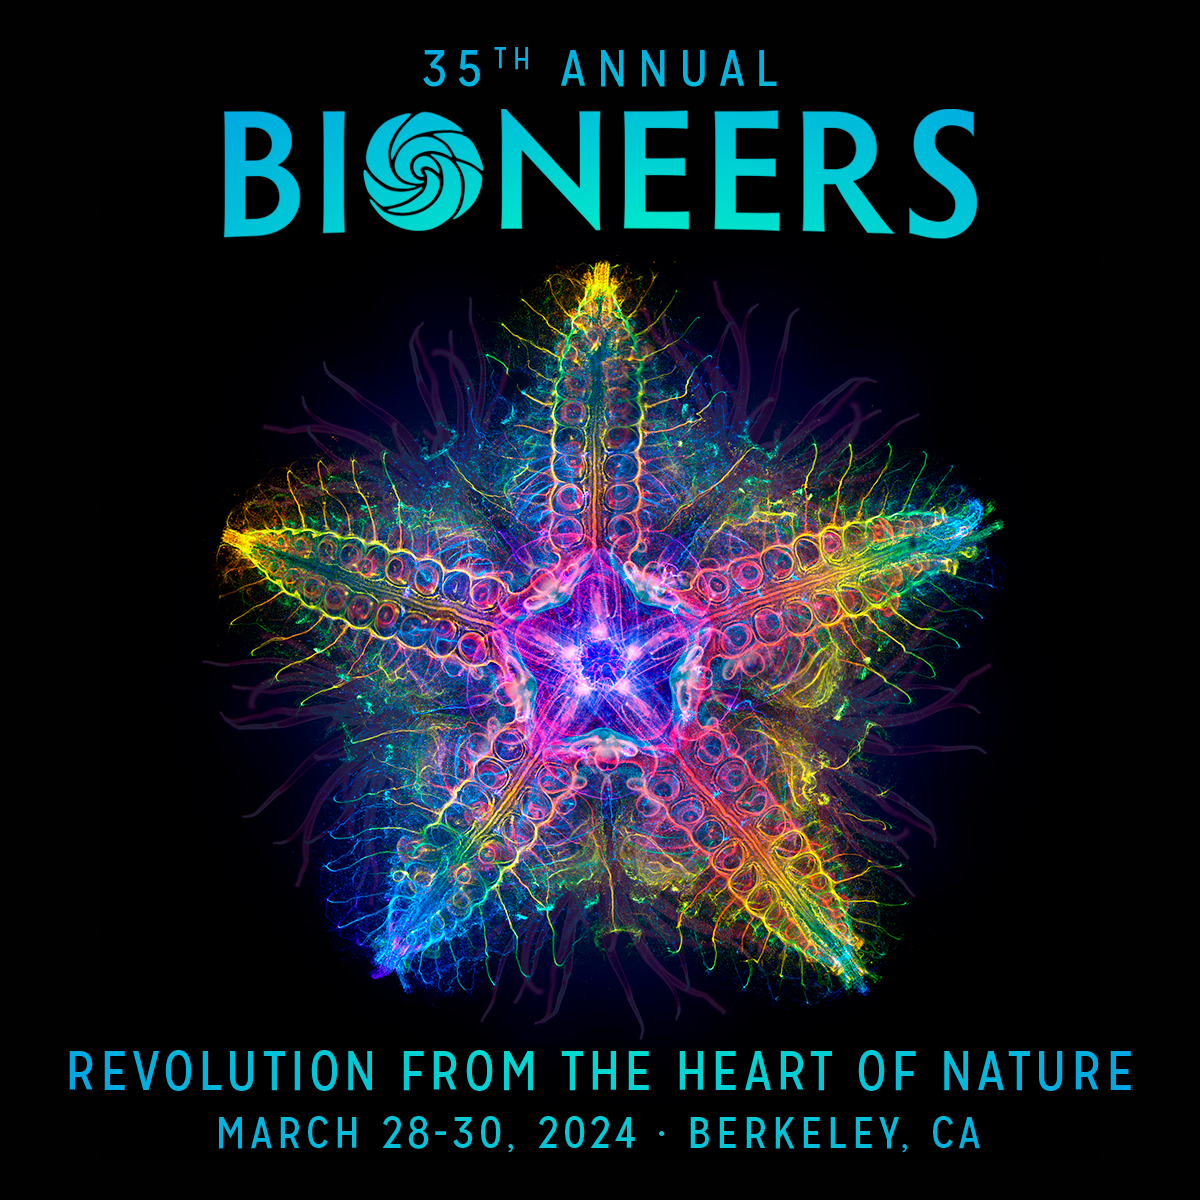 I'm participating in a panel at #Bioneers2024 on March 30th! I'm honored to join an incredible group of leaders to discuss solutions to today’s most pressing challenges. Join hundreds of speakers and thousands of attendees coming together around making change.